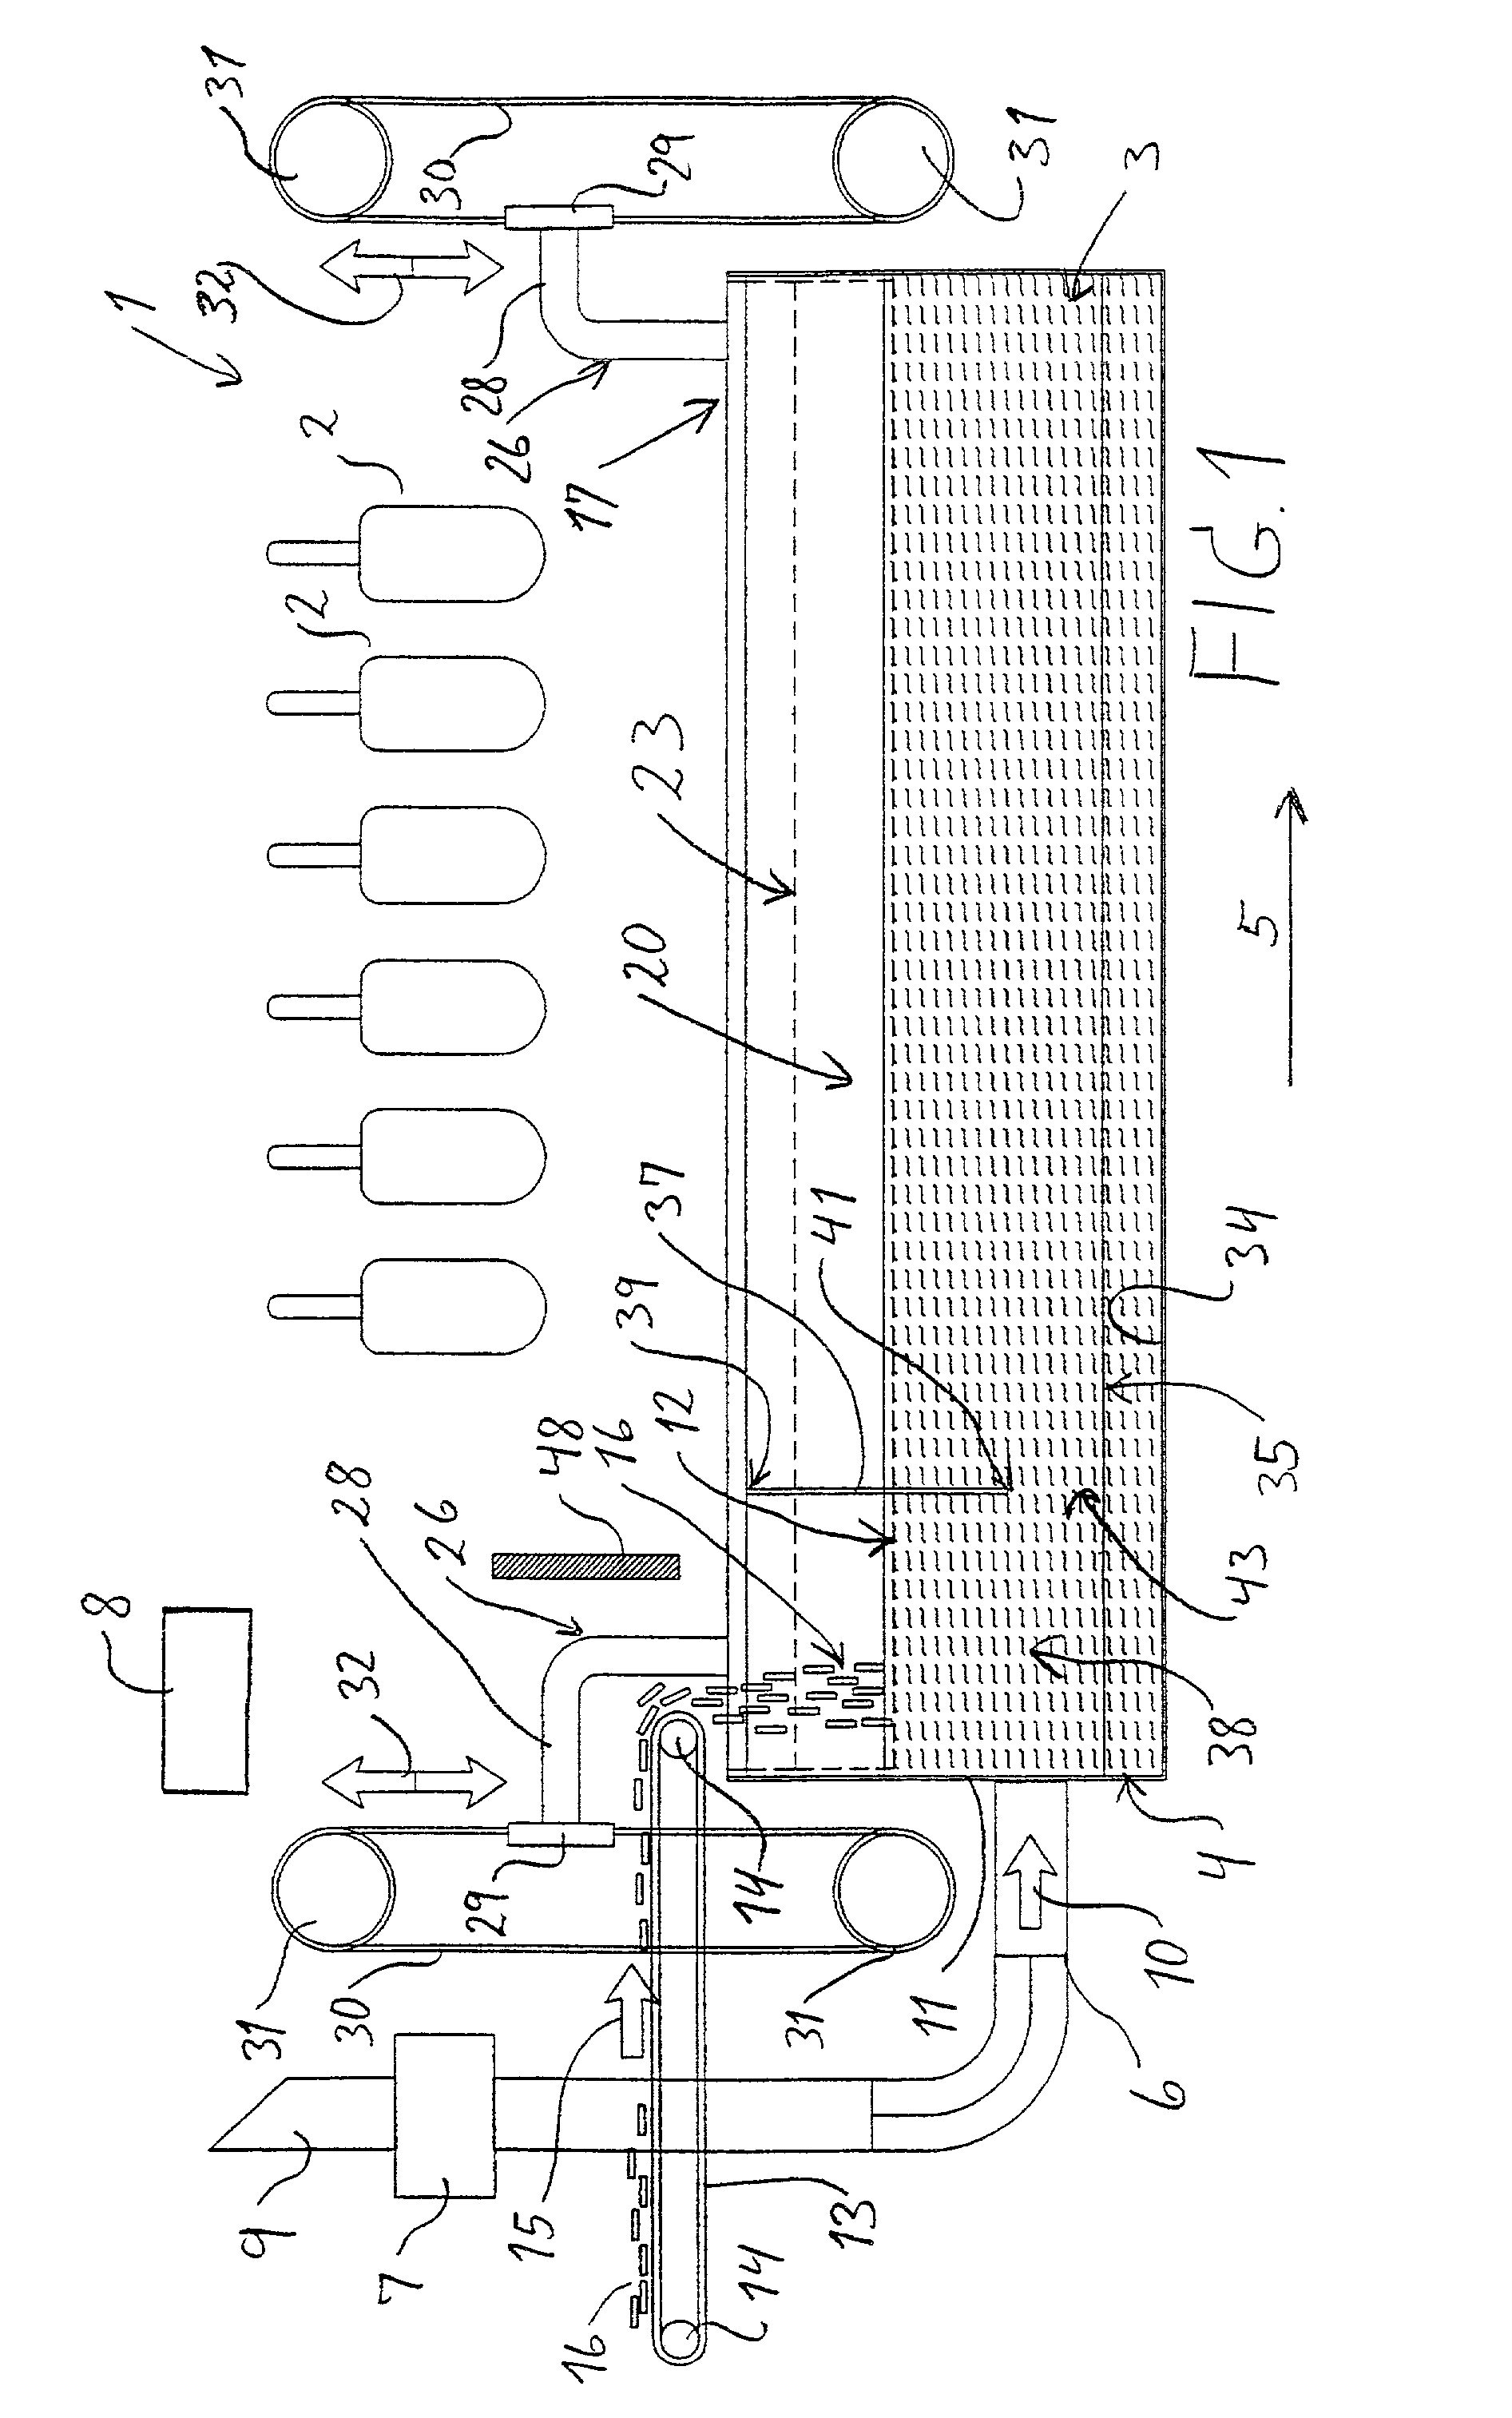 Method and apparatus for coating a product